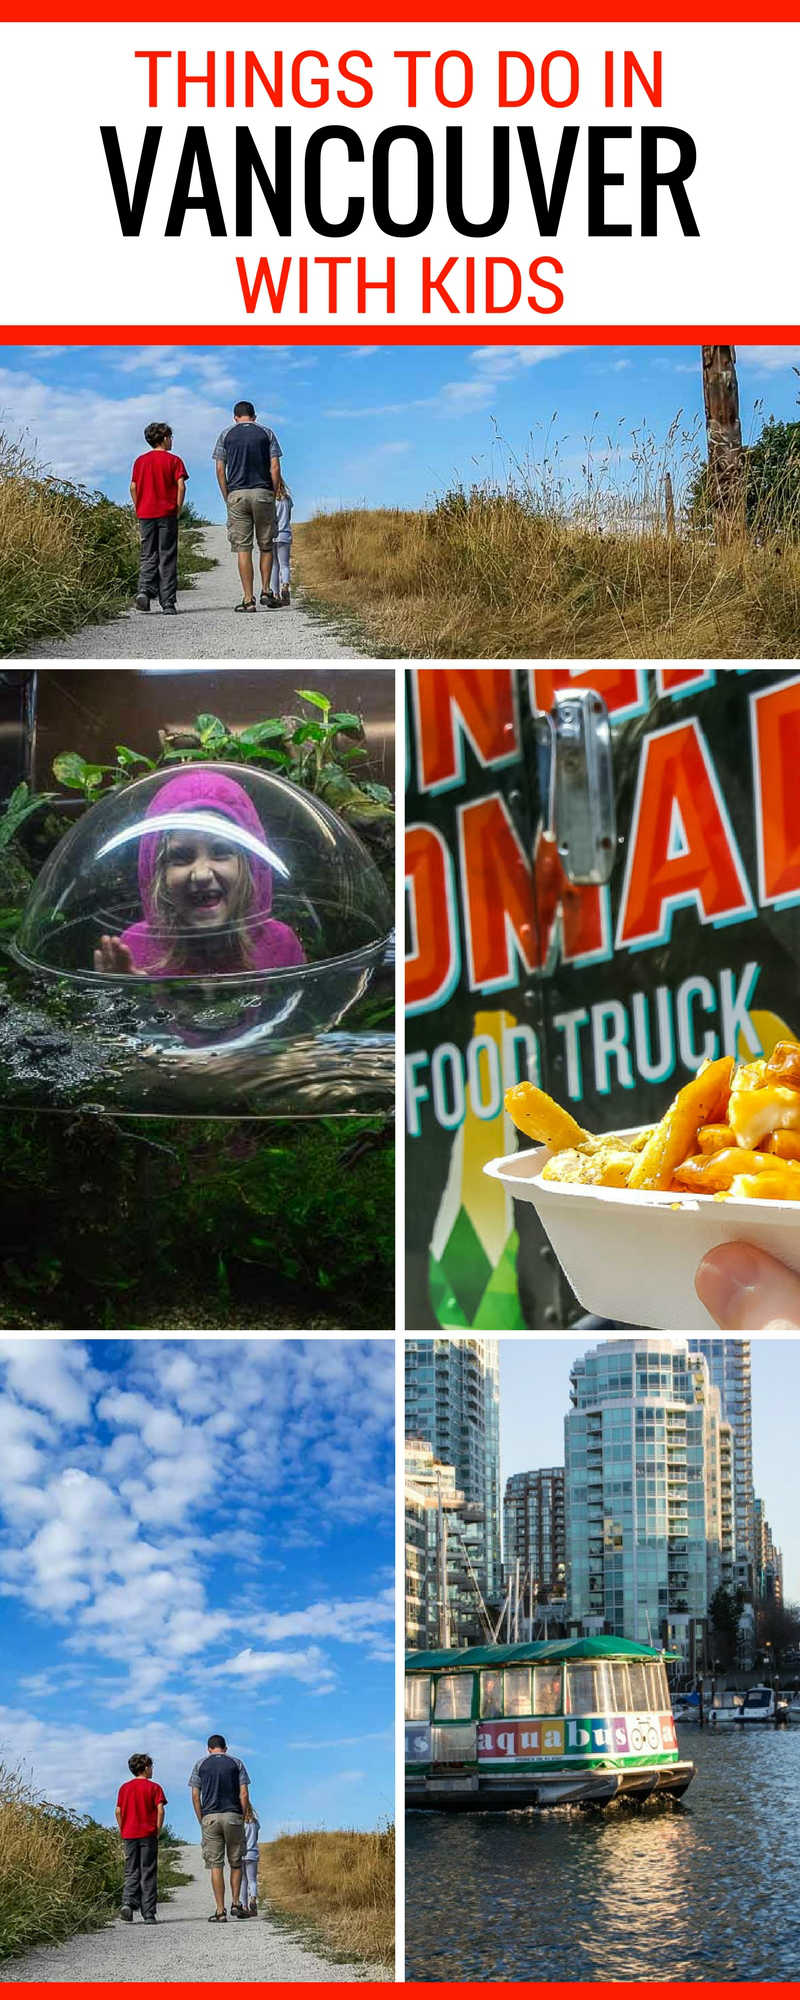 Things to do in Vancouver with Kids There are hundreds of things to do in Vancouver with the kids, from indoor fun like the Vancouver Aquarium, to outdoor adventure by the ocean, to thrill seeking fun on the Lynn Canyon or Capilano suspension bridge. | Vancouver Travel | Vancouver BC Canada | Vancouver with kids | Vancouver with Family #Vancouver #BC #travel